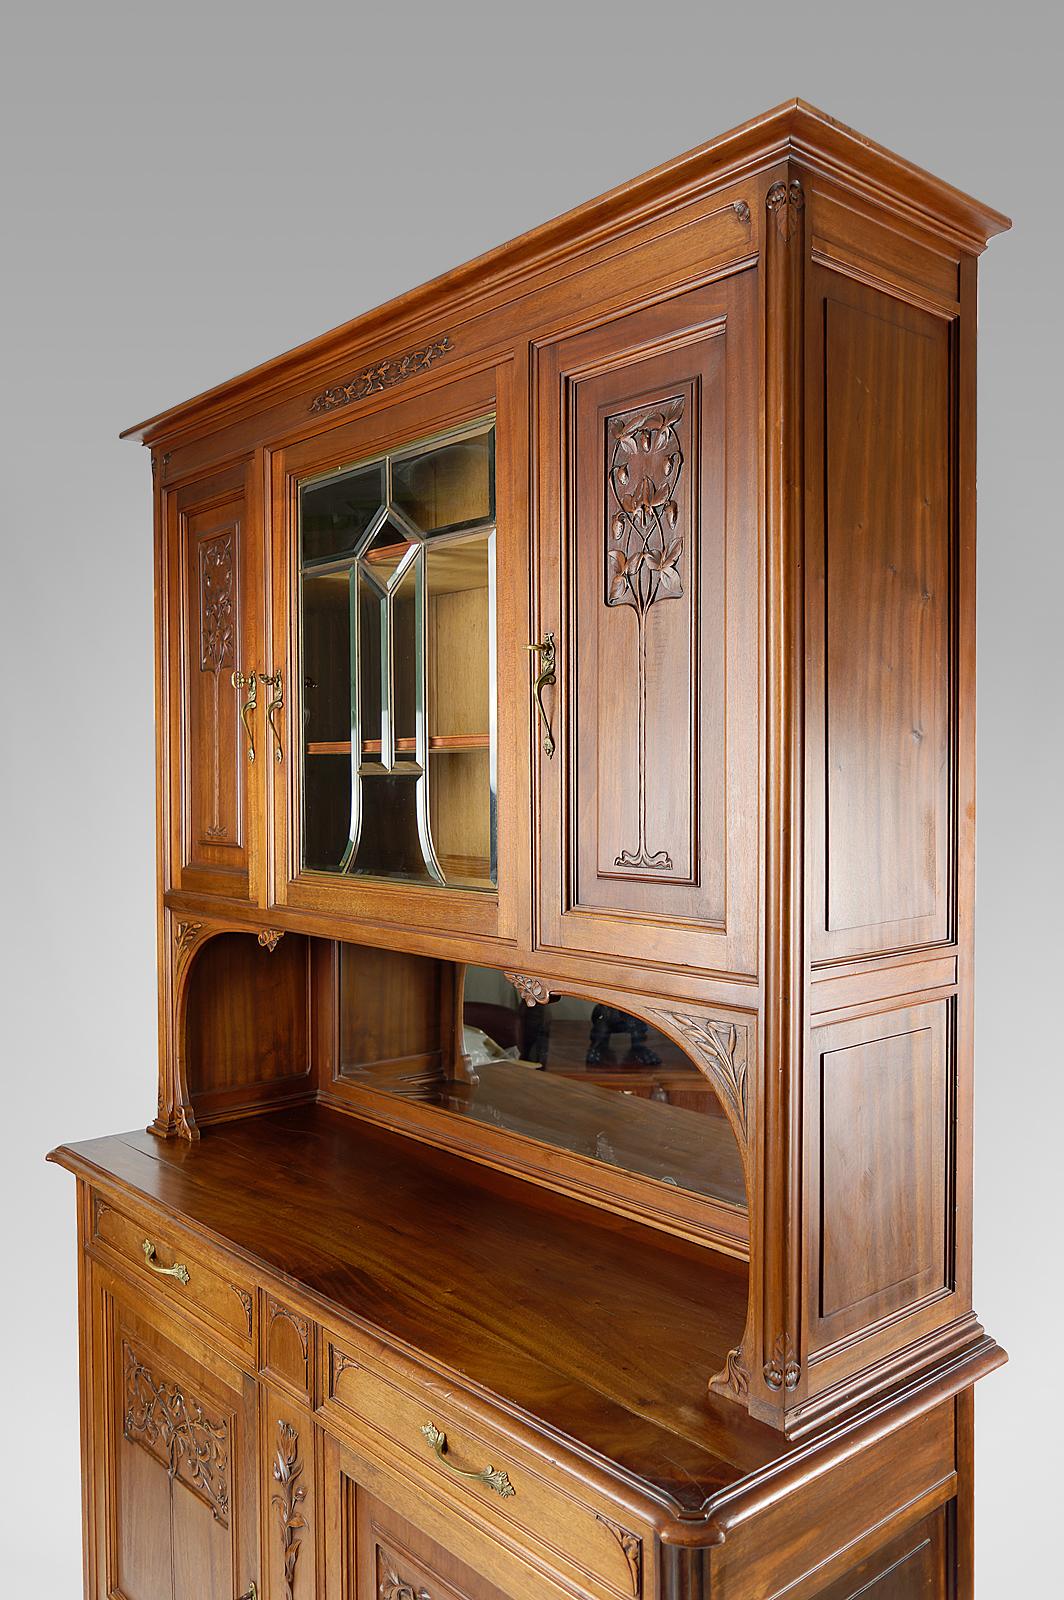 Early 20th Century French Art Nouveau Sideboard in Carved Walnut with Stained Glass, circa 1910 For Sale